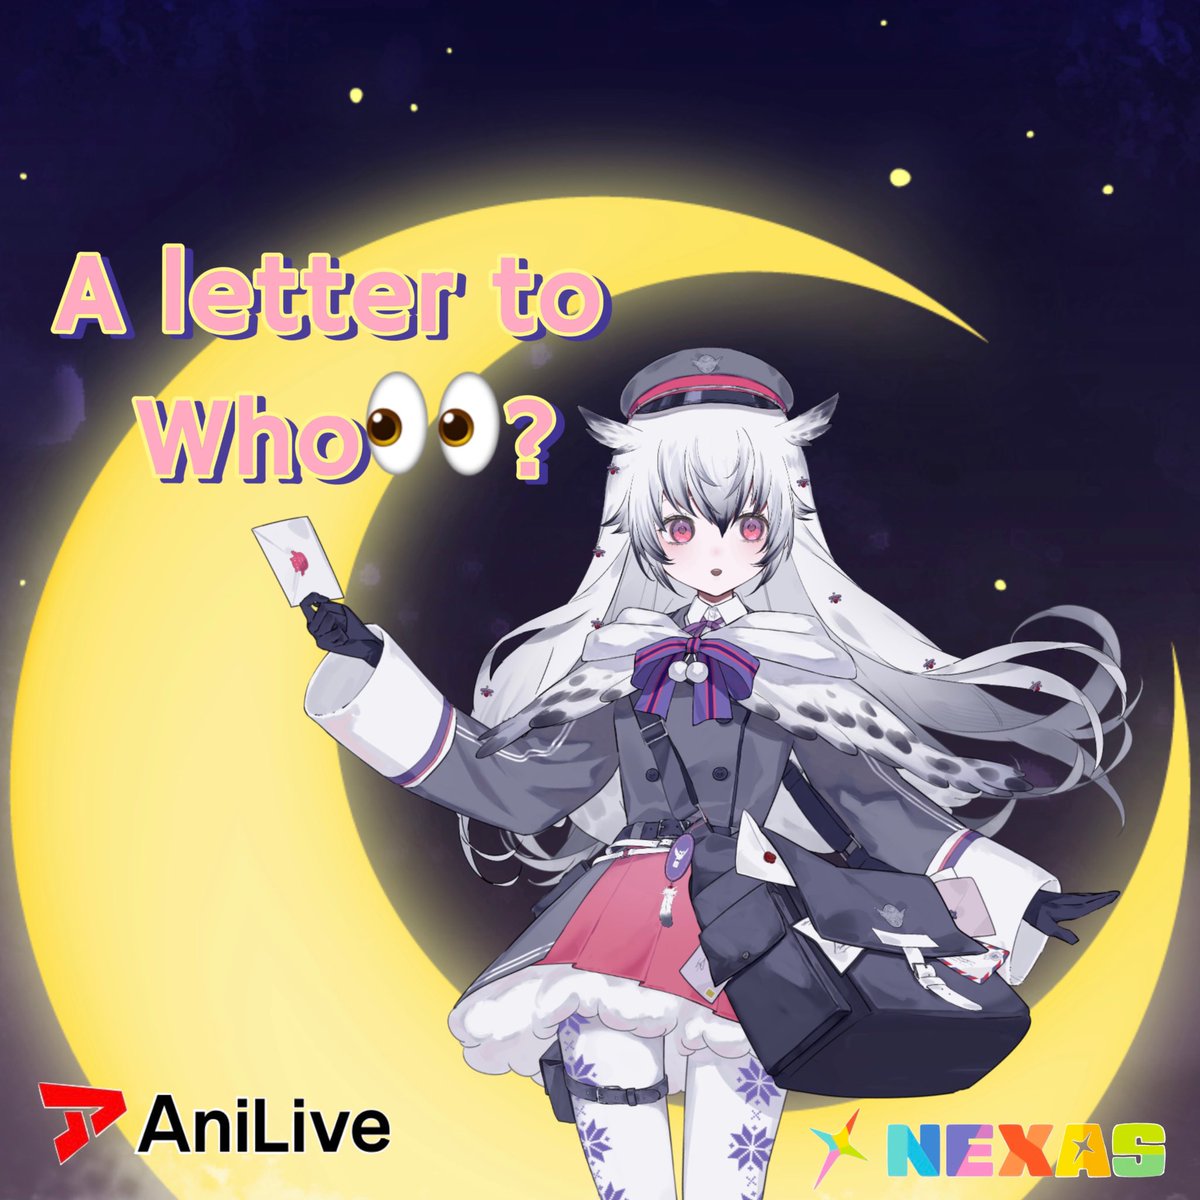 LETTER STREAM OPEN NOWWWW

Who are we making a letter to~? 
Join us on @AniLive_app and find out!!

See you there~
#OdetteIsMyLetter #NEXAS #AniLive